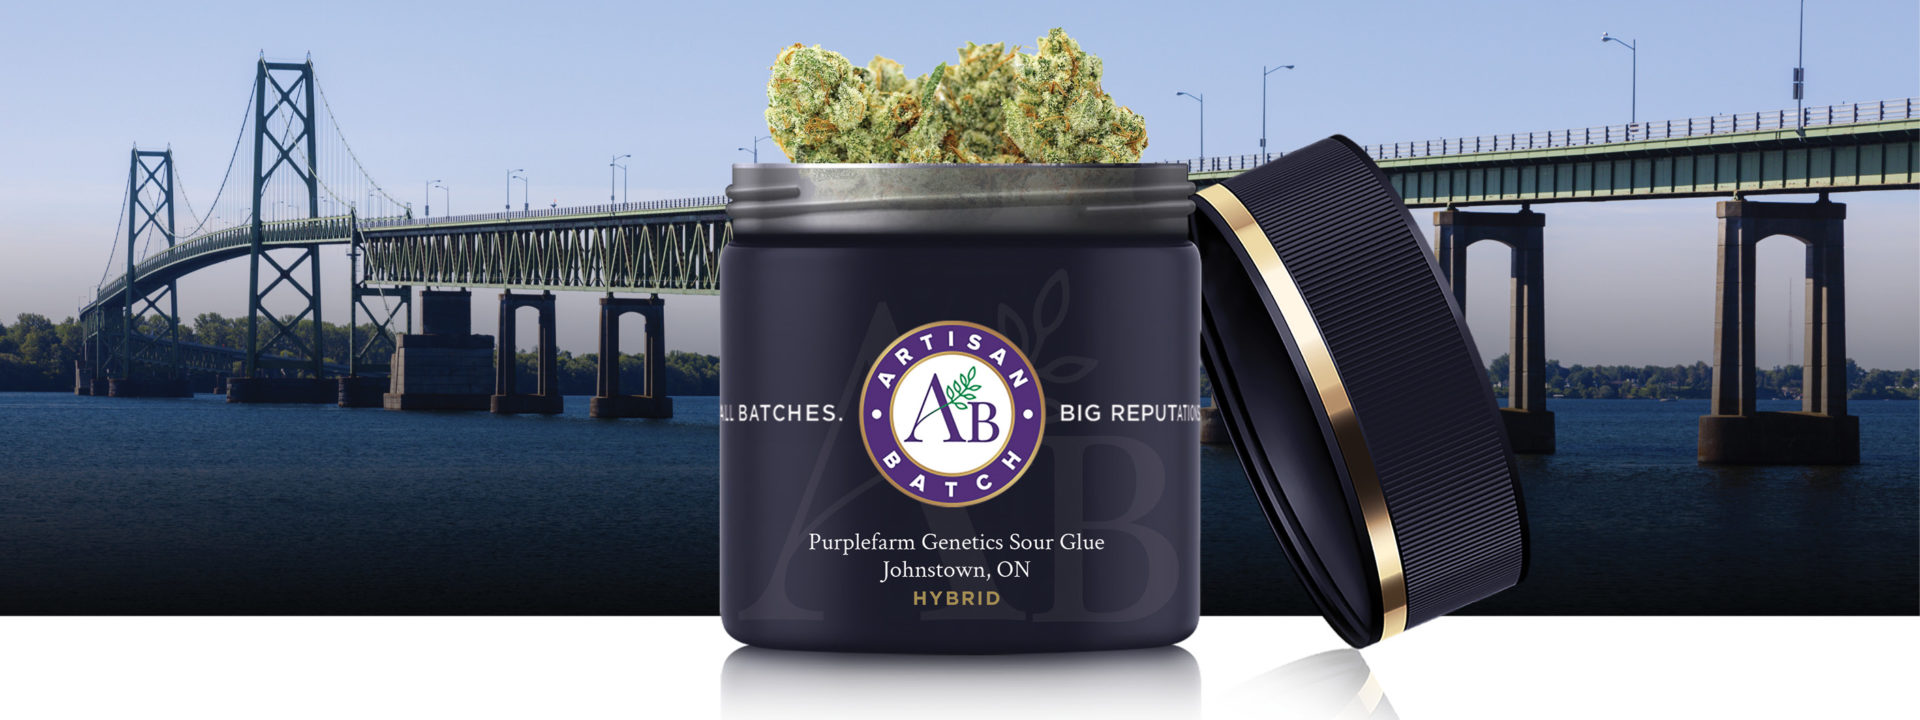 Beauty jar of Purplefarm Genetics with lid off and bud peeking out of open top. Background image is the Johnston Ontario bridge crossing the river